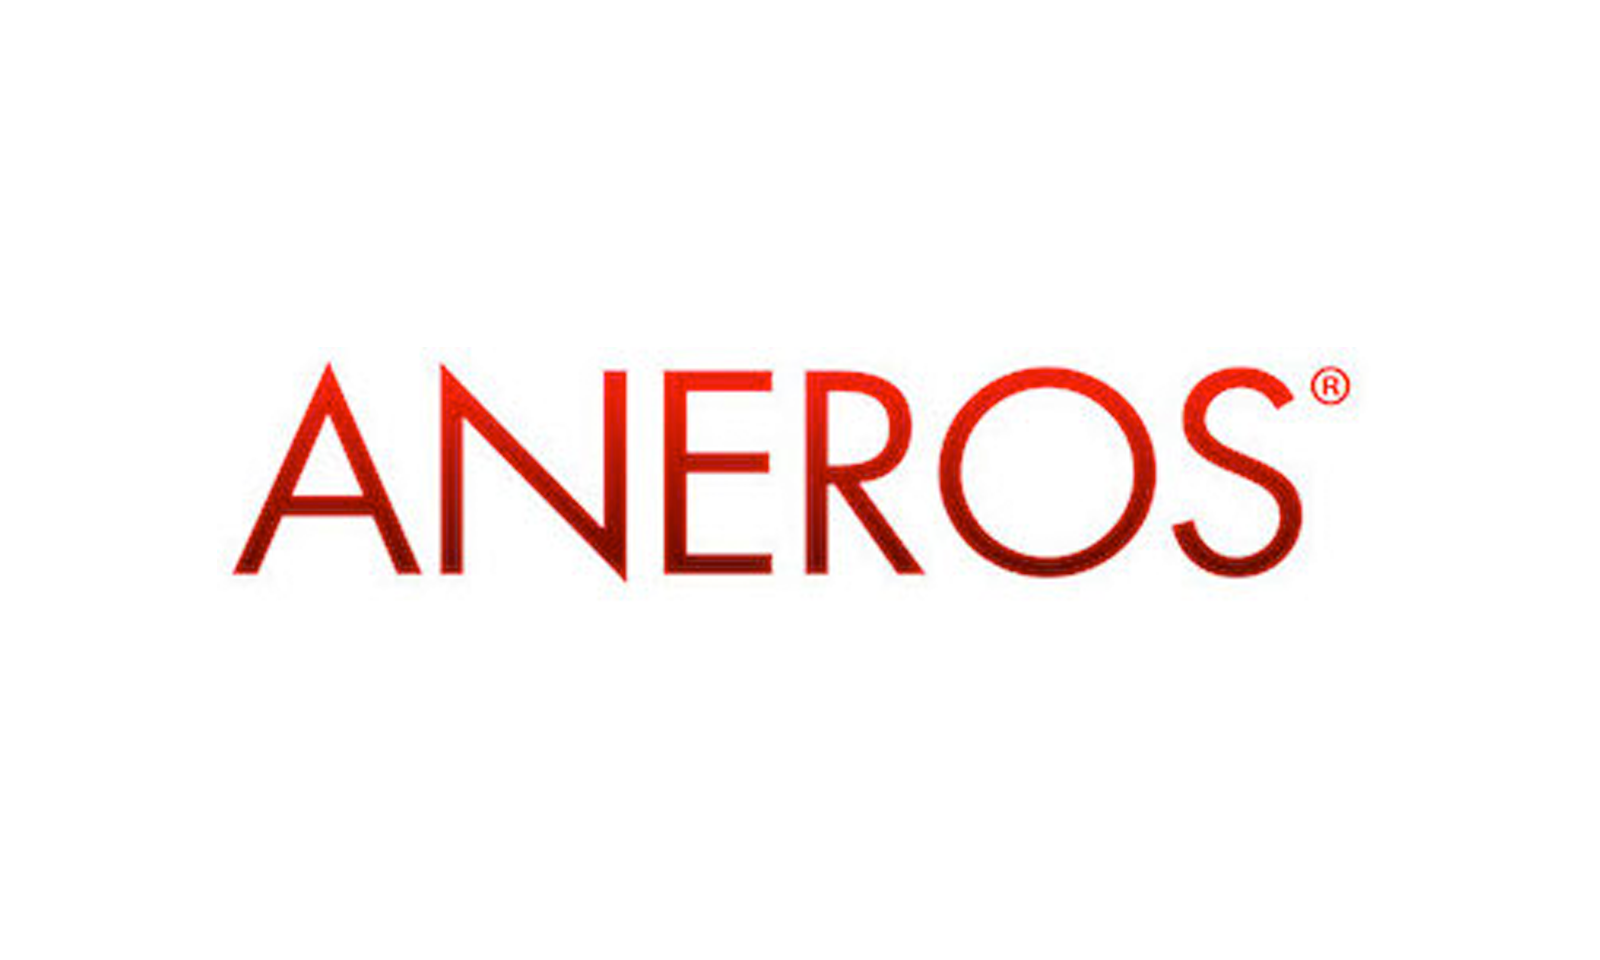 Aneros Signs On as 2019 Cybersocket Web Awards Gold Sponsor